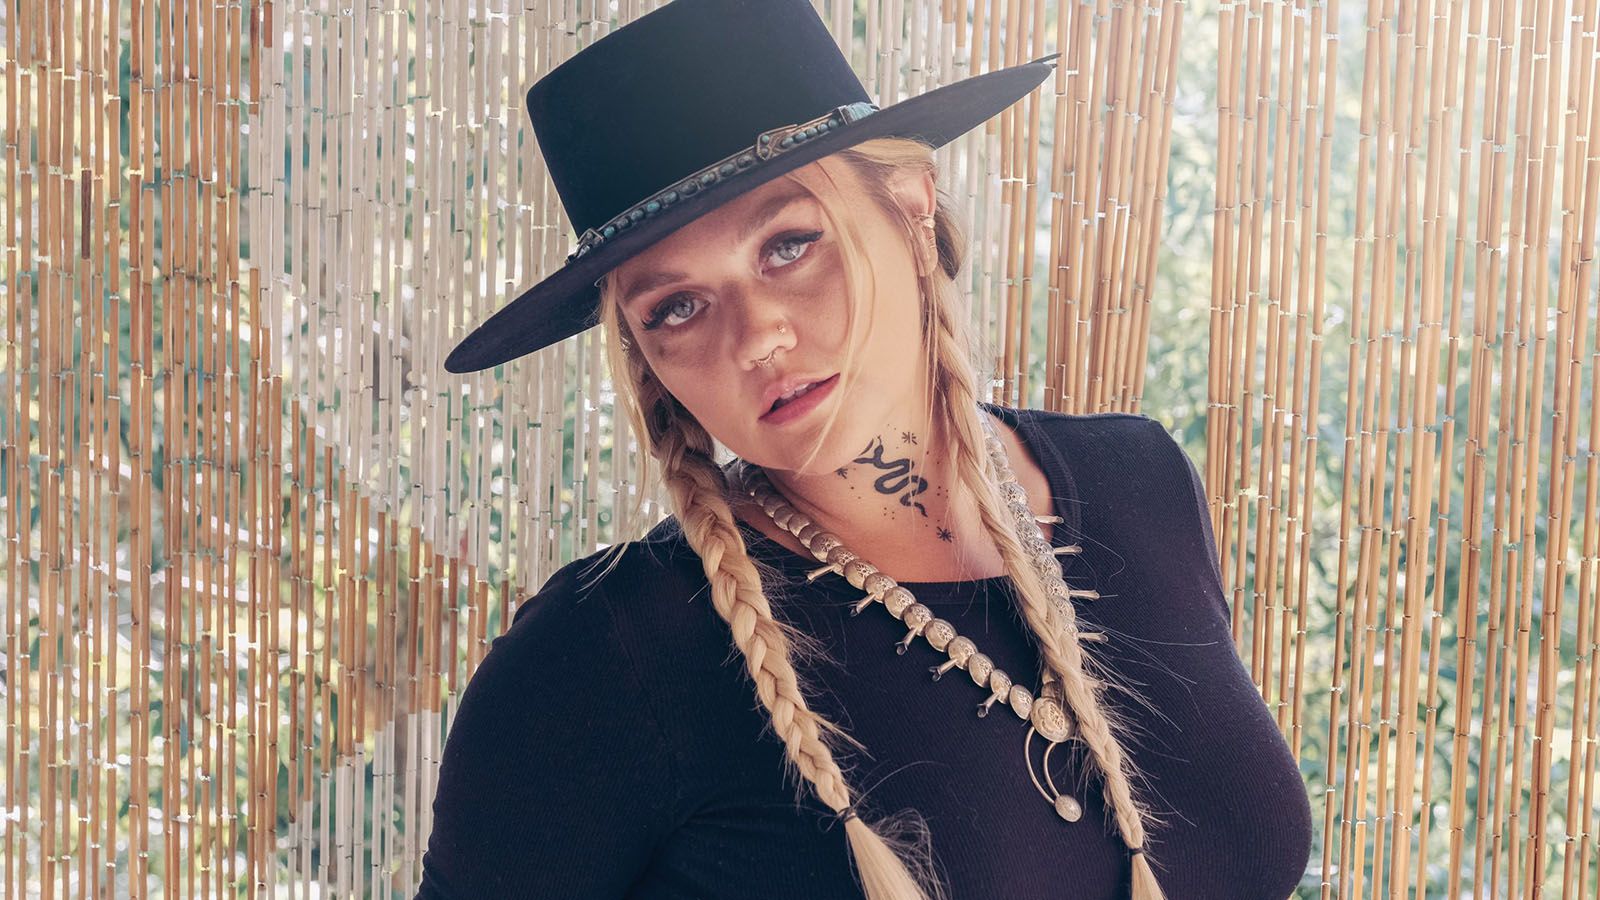 Country artist Elle King will perform at The Clyde Theatre on Thursday, Sept. 5.